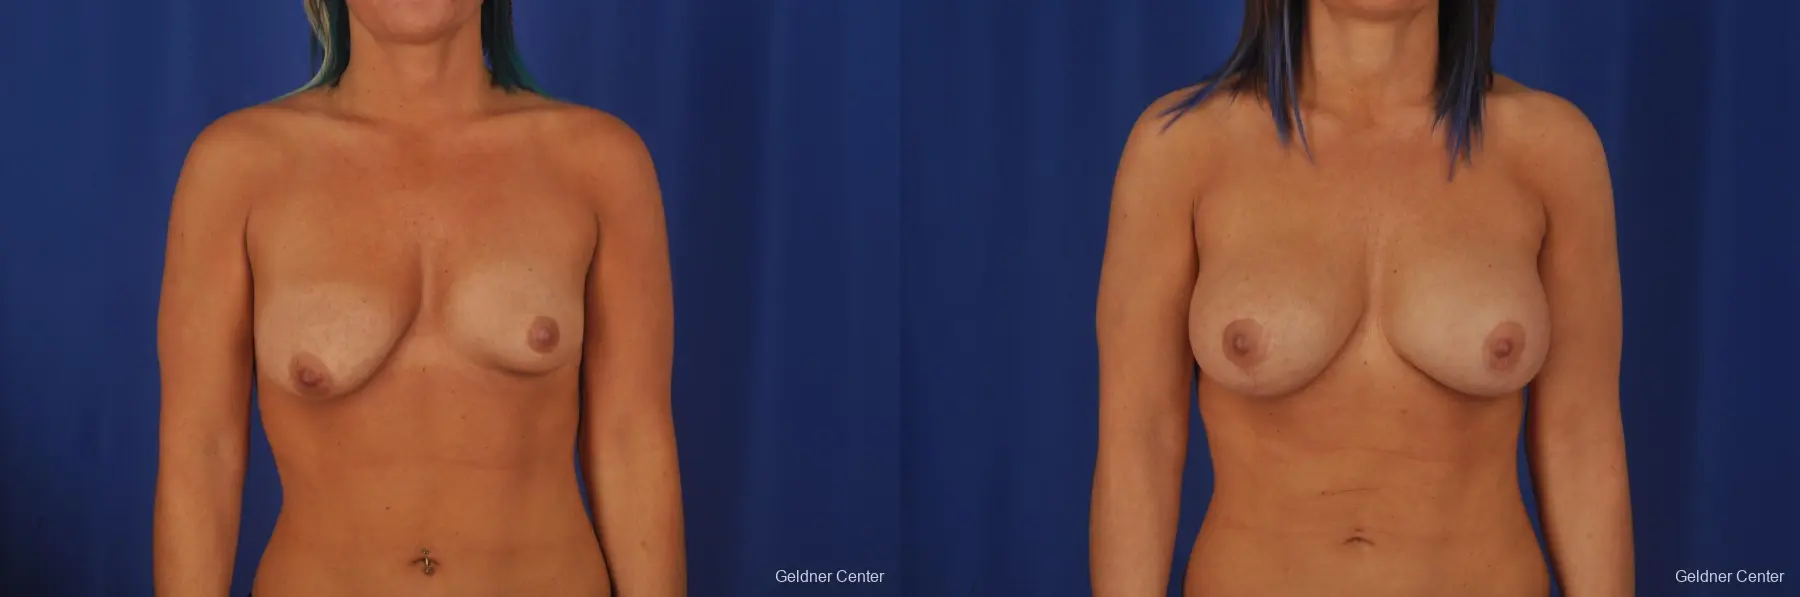 Breast Lift Lake Shore Dr, Chicago 2337 - Before and After 1